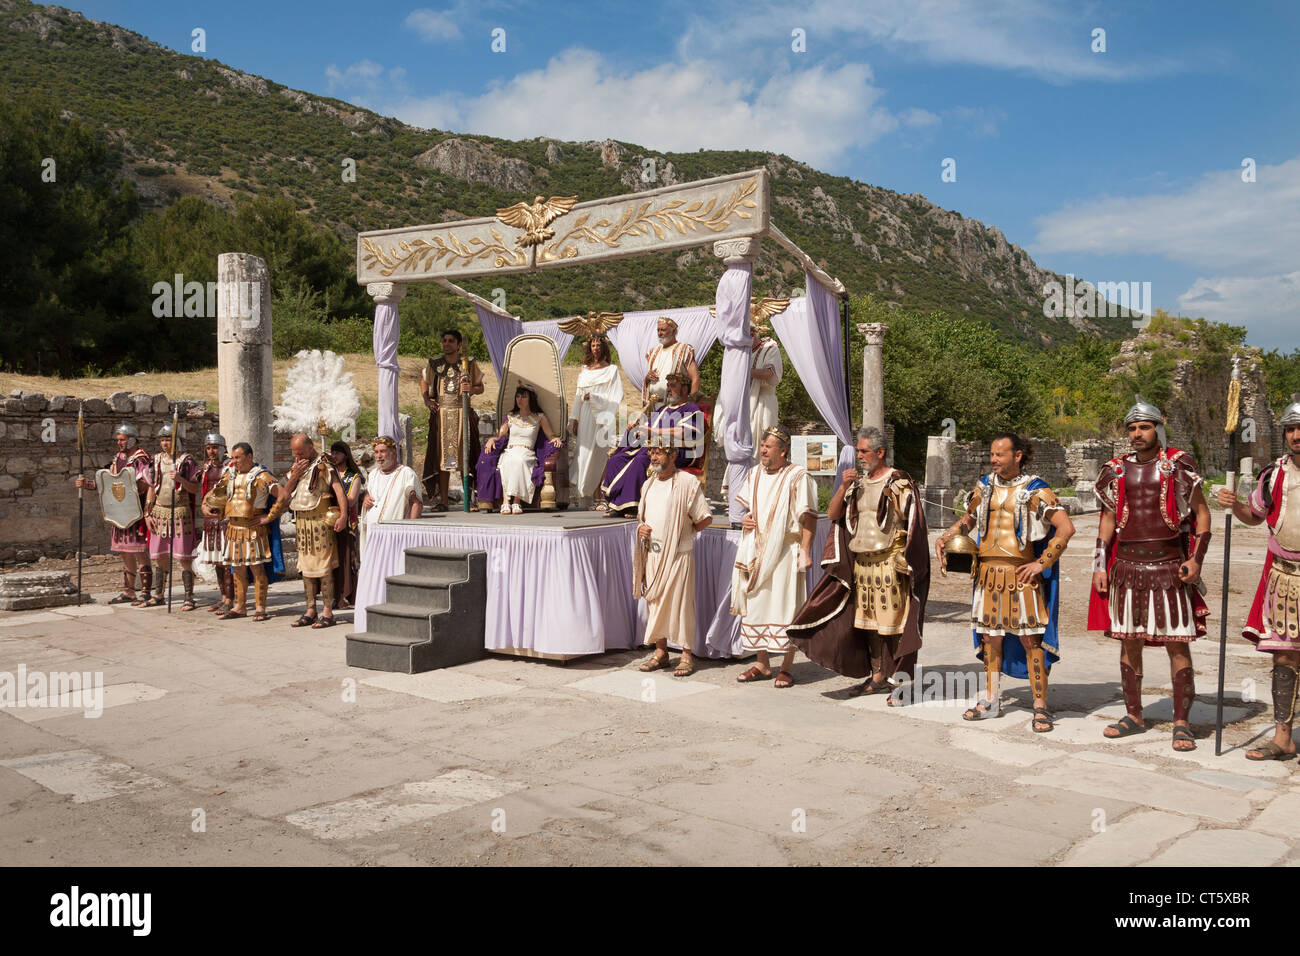 Reenacting an historical Roman event, with Caesar and Cleopatra on the stage, Ephesus, Turkey Stock Photo